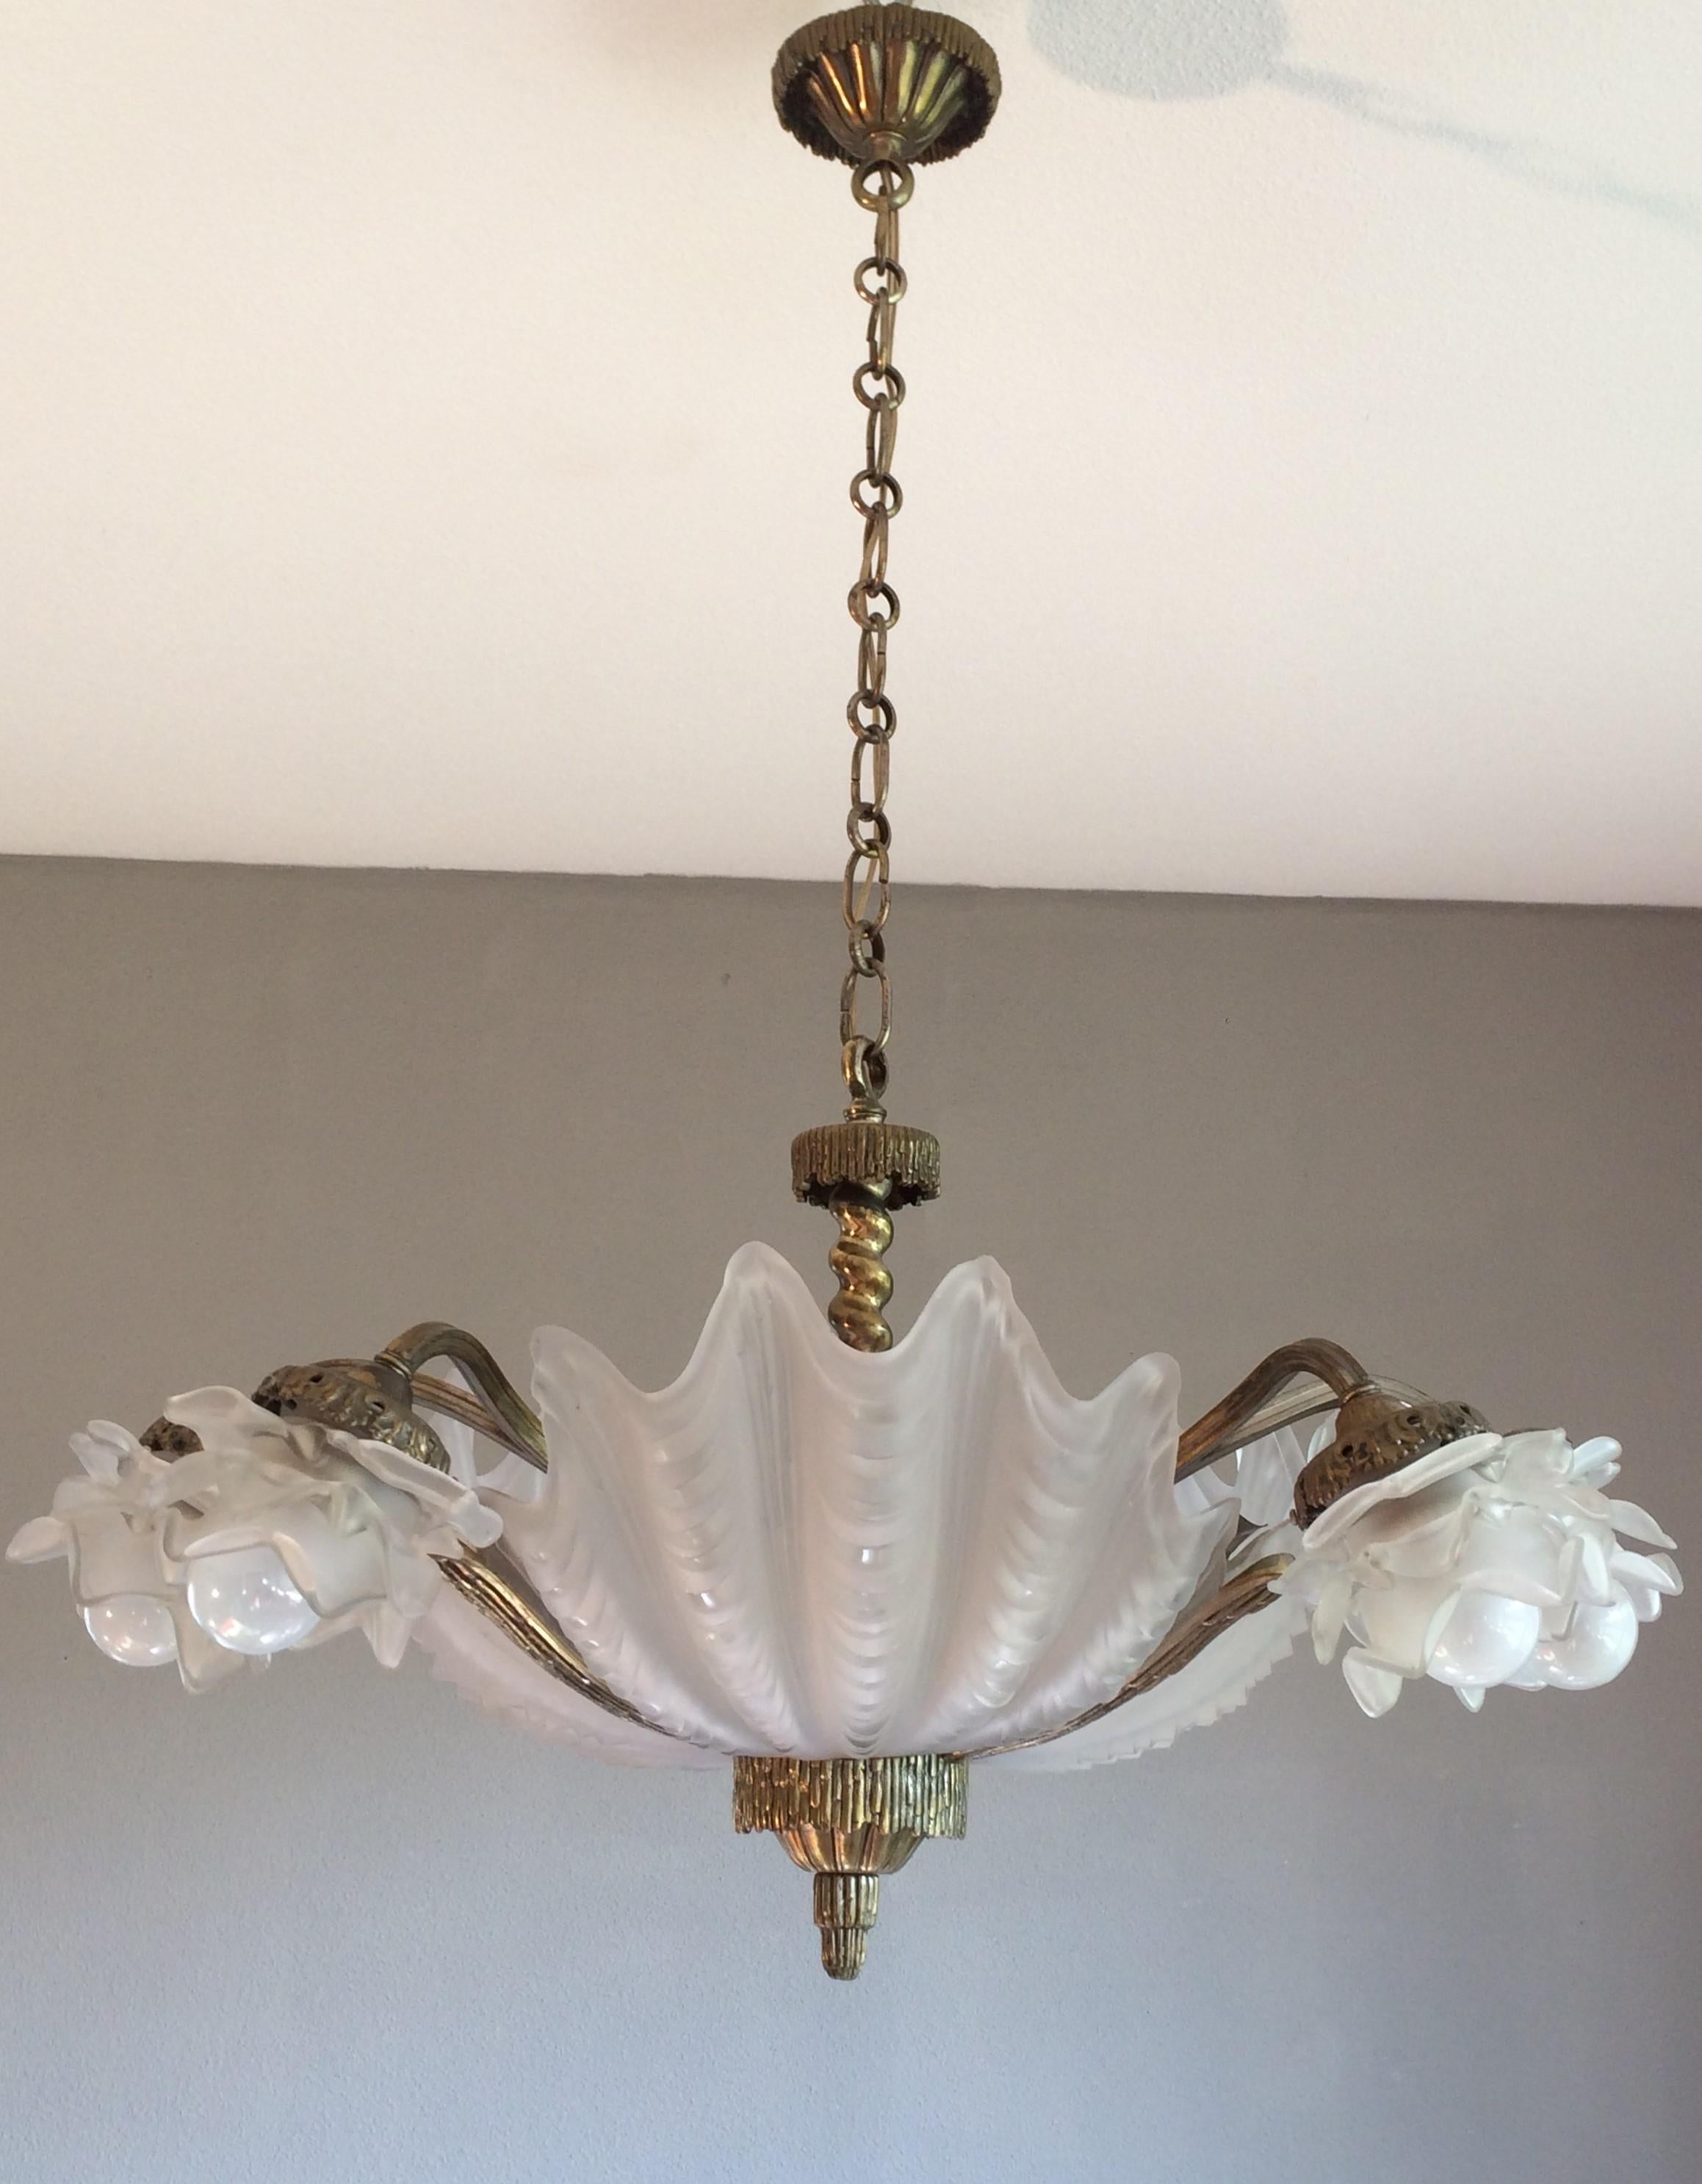 Hand-Crafted Stylish and All Handcrafted Nine Light Bronze and Icy Glass Art Deco Chandelier